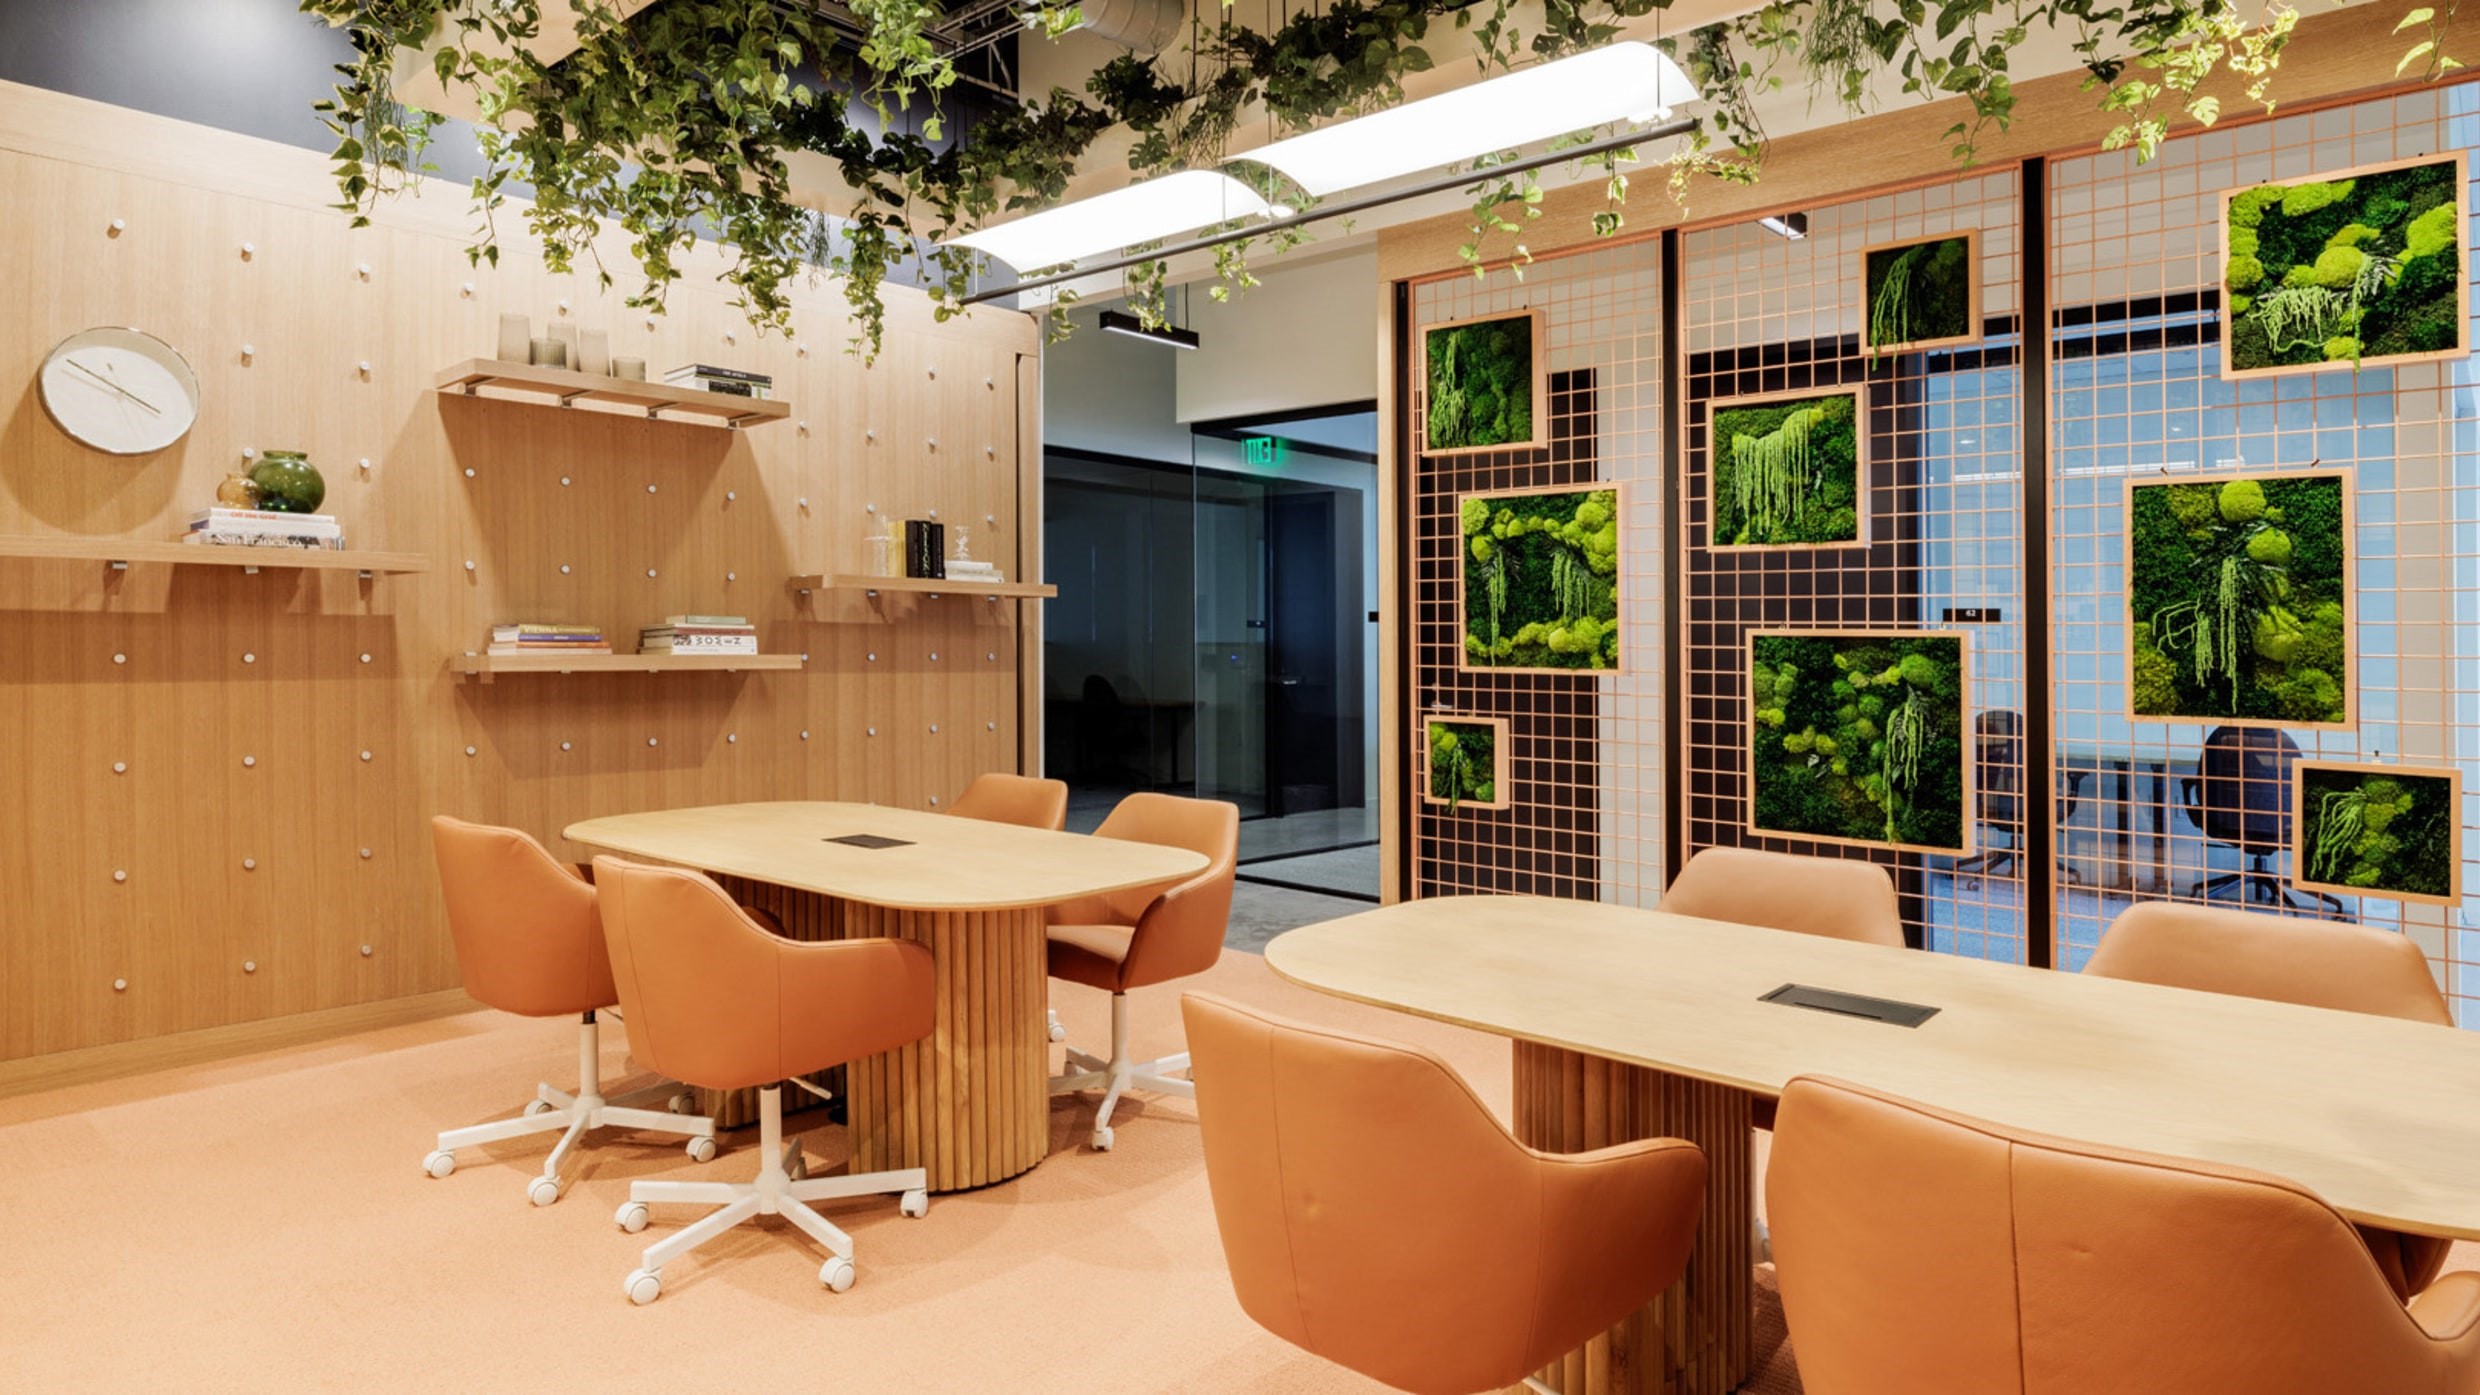 Ikea has a plan for the office of the future, and it looks a lot like coworking